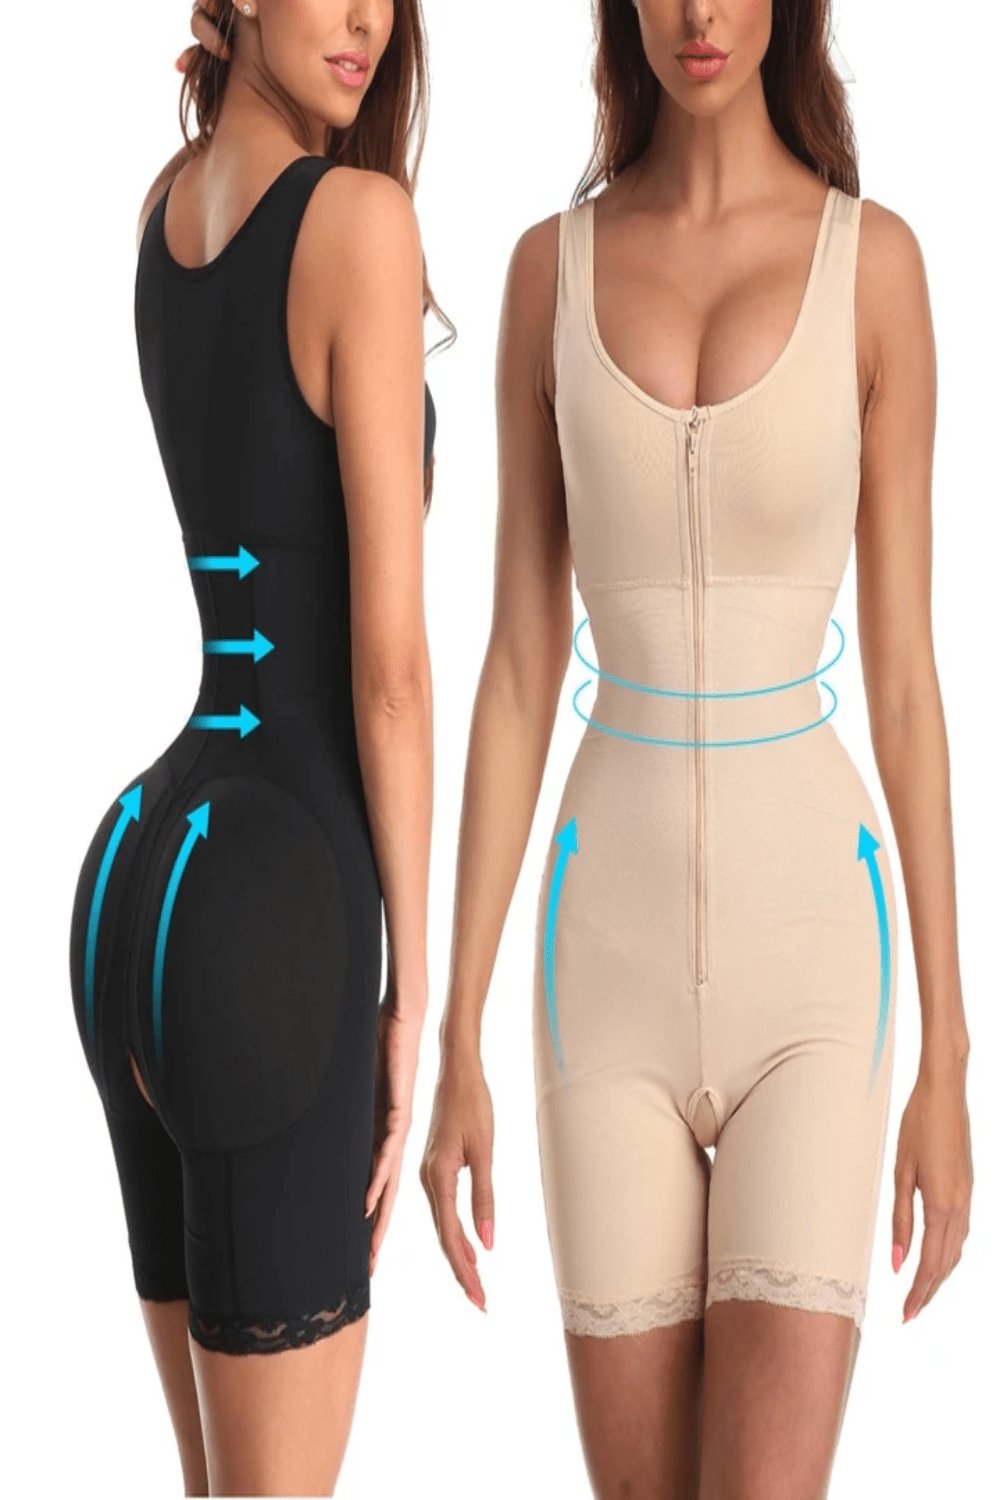 Champagne Firm Tummy Compression Bodysuit Shaper With Butt